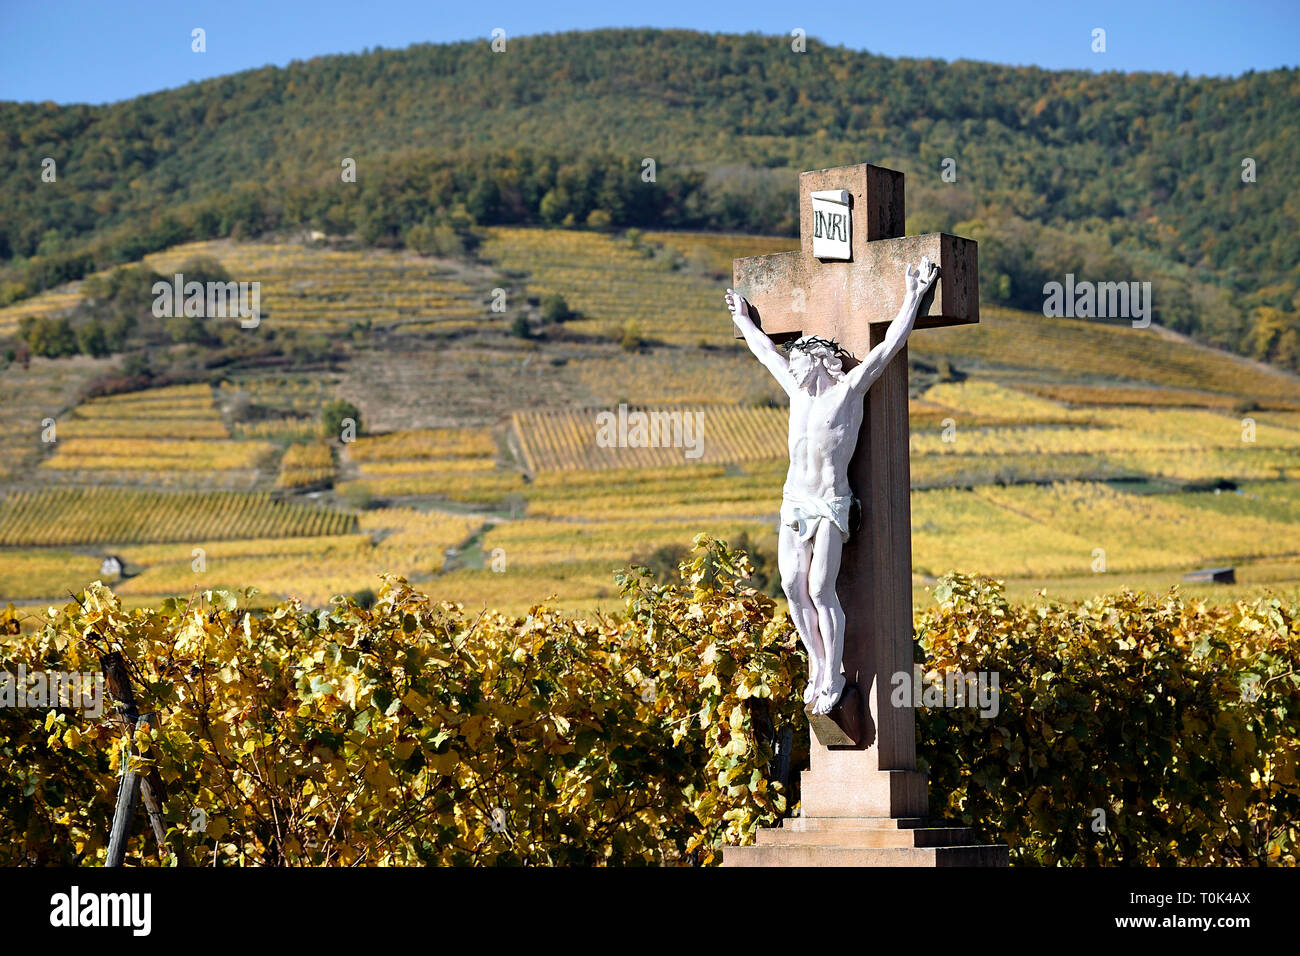 Europe, France, Alsace, vineyards in autumn. Stock Photo